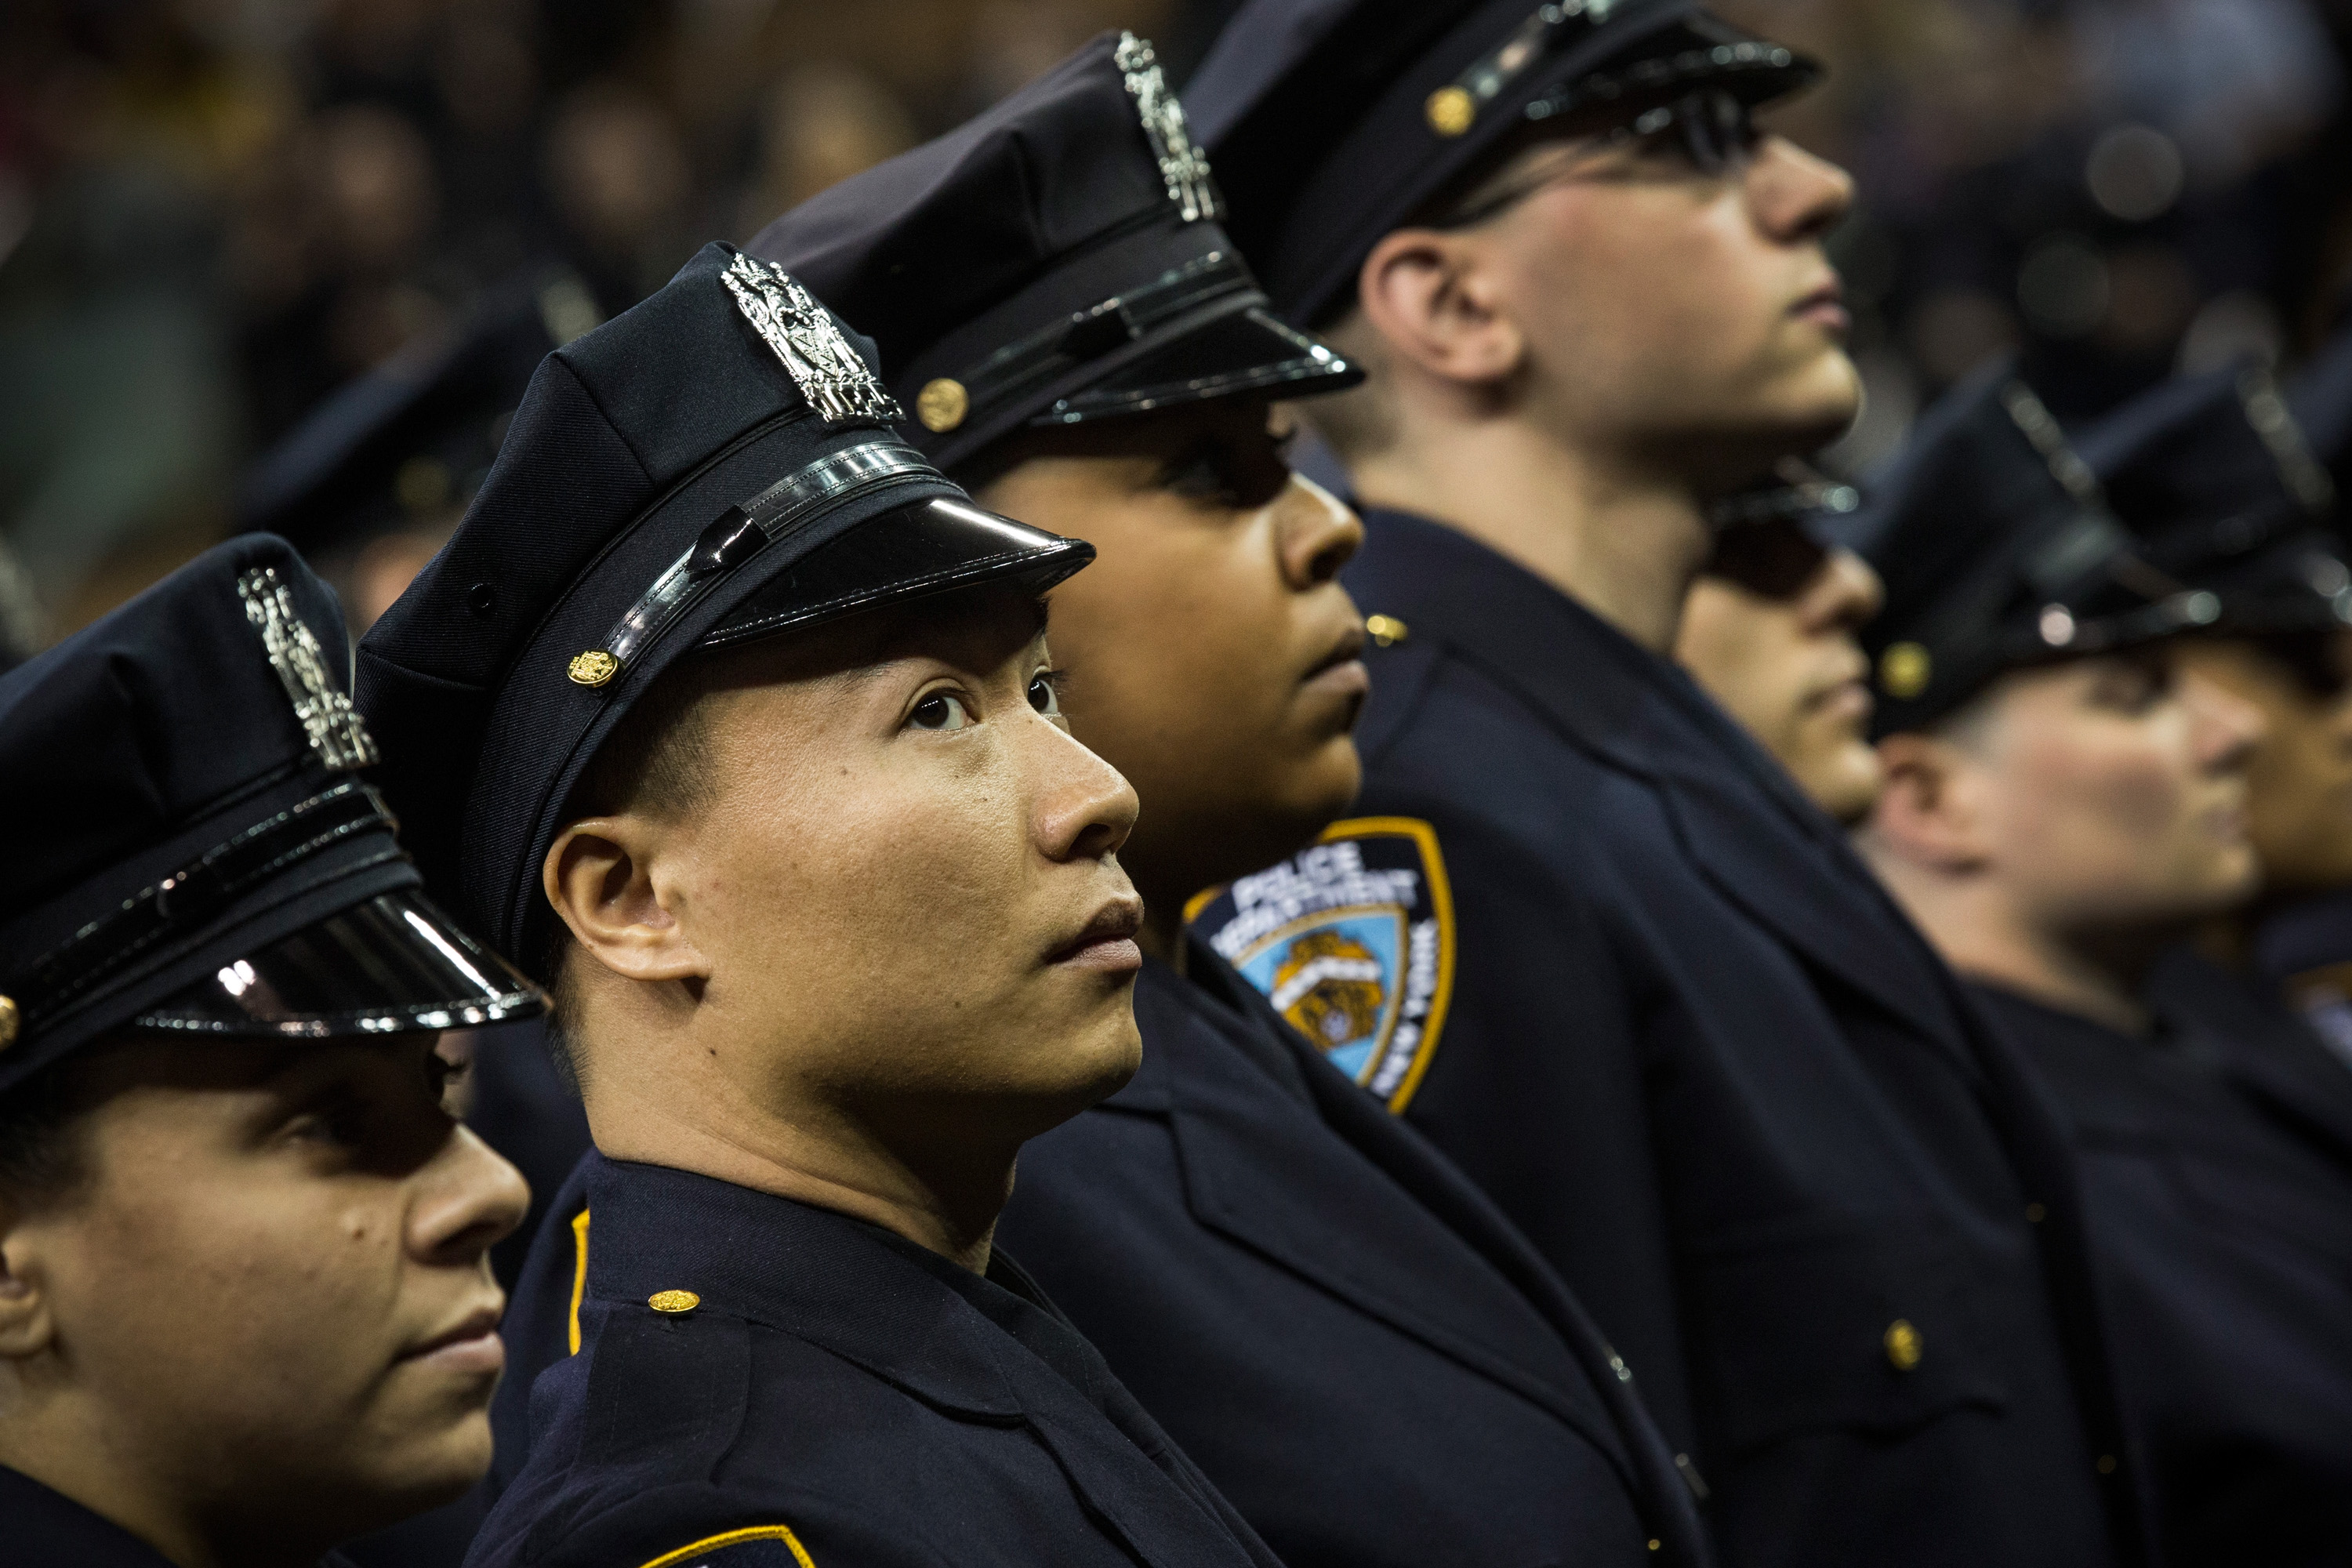 Members of a 2014 class of the New York Police Department. (Photo by Andrew Burton/Getty Images)